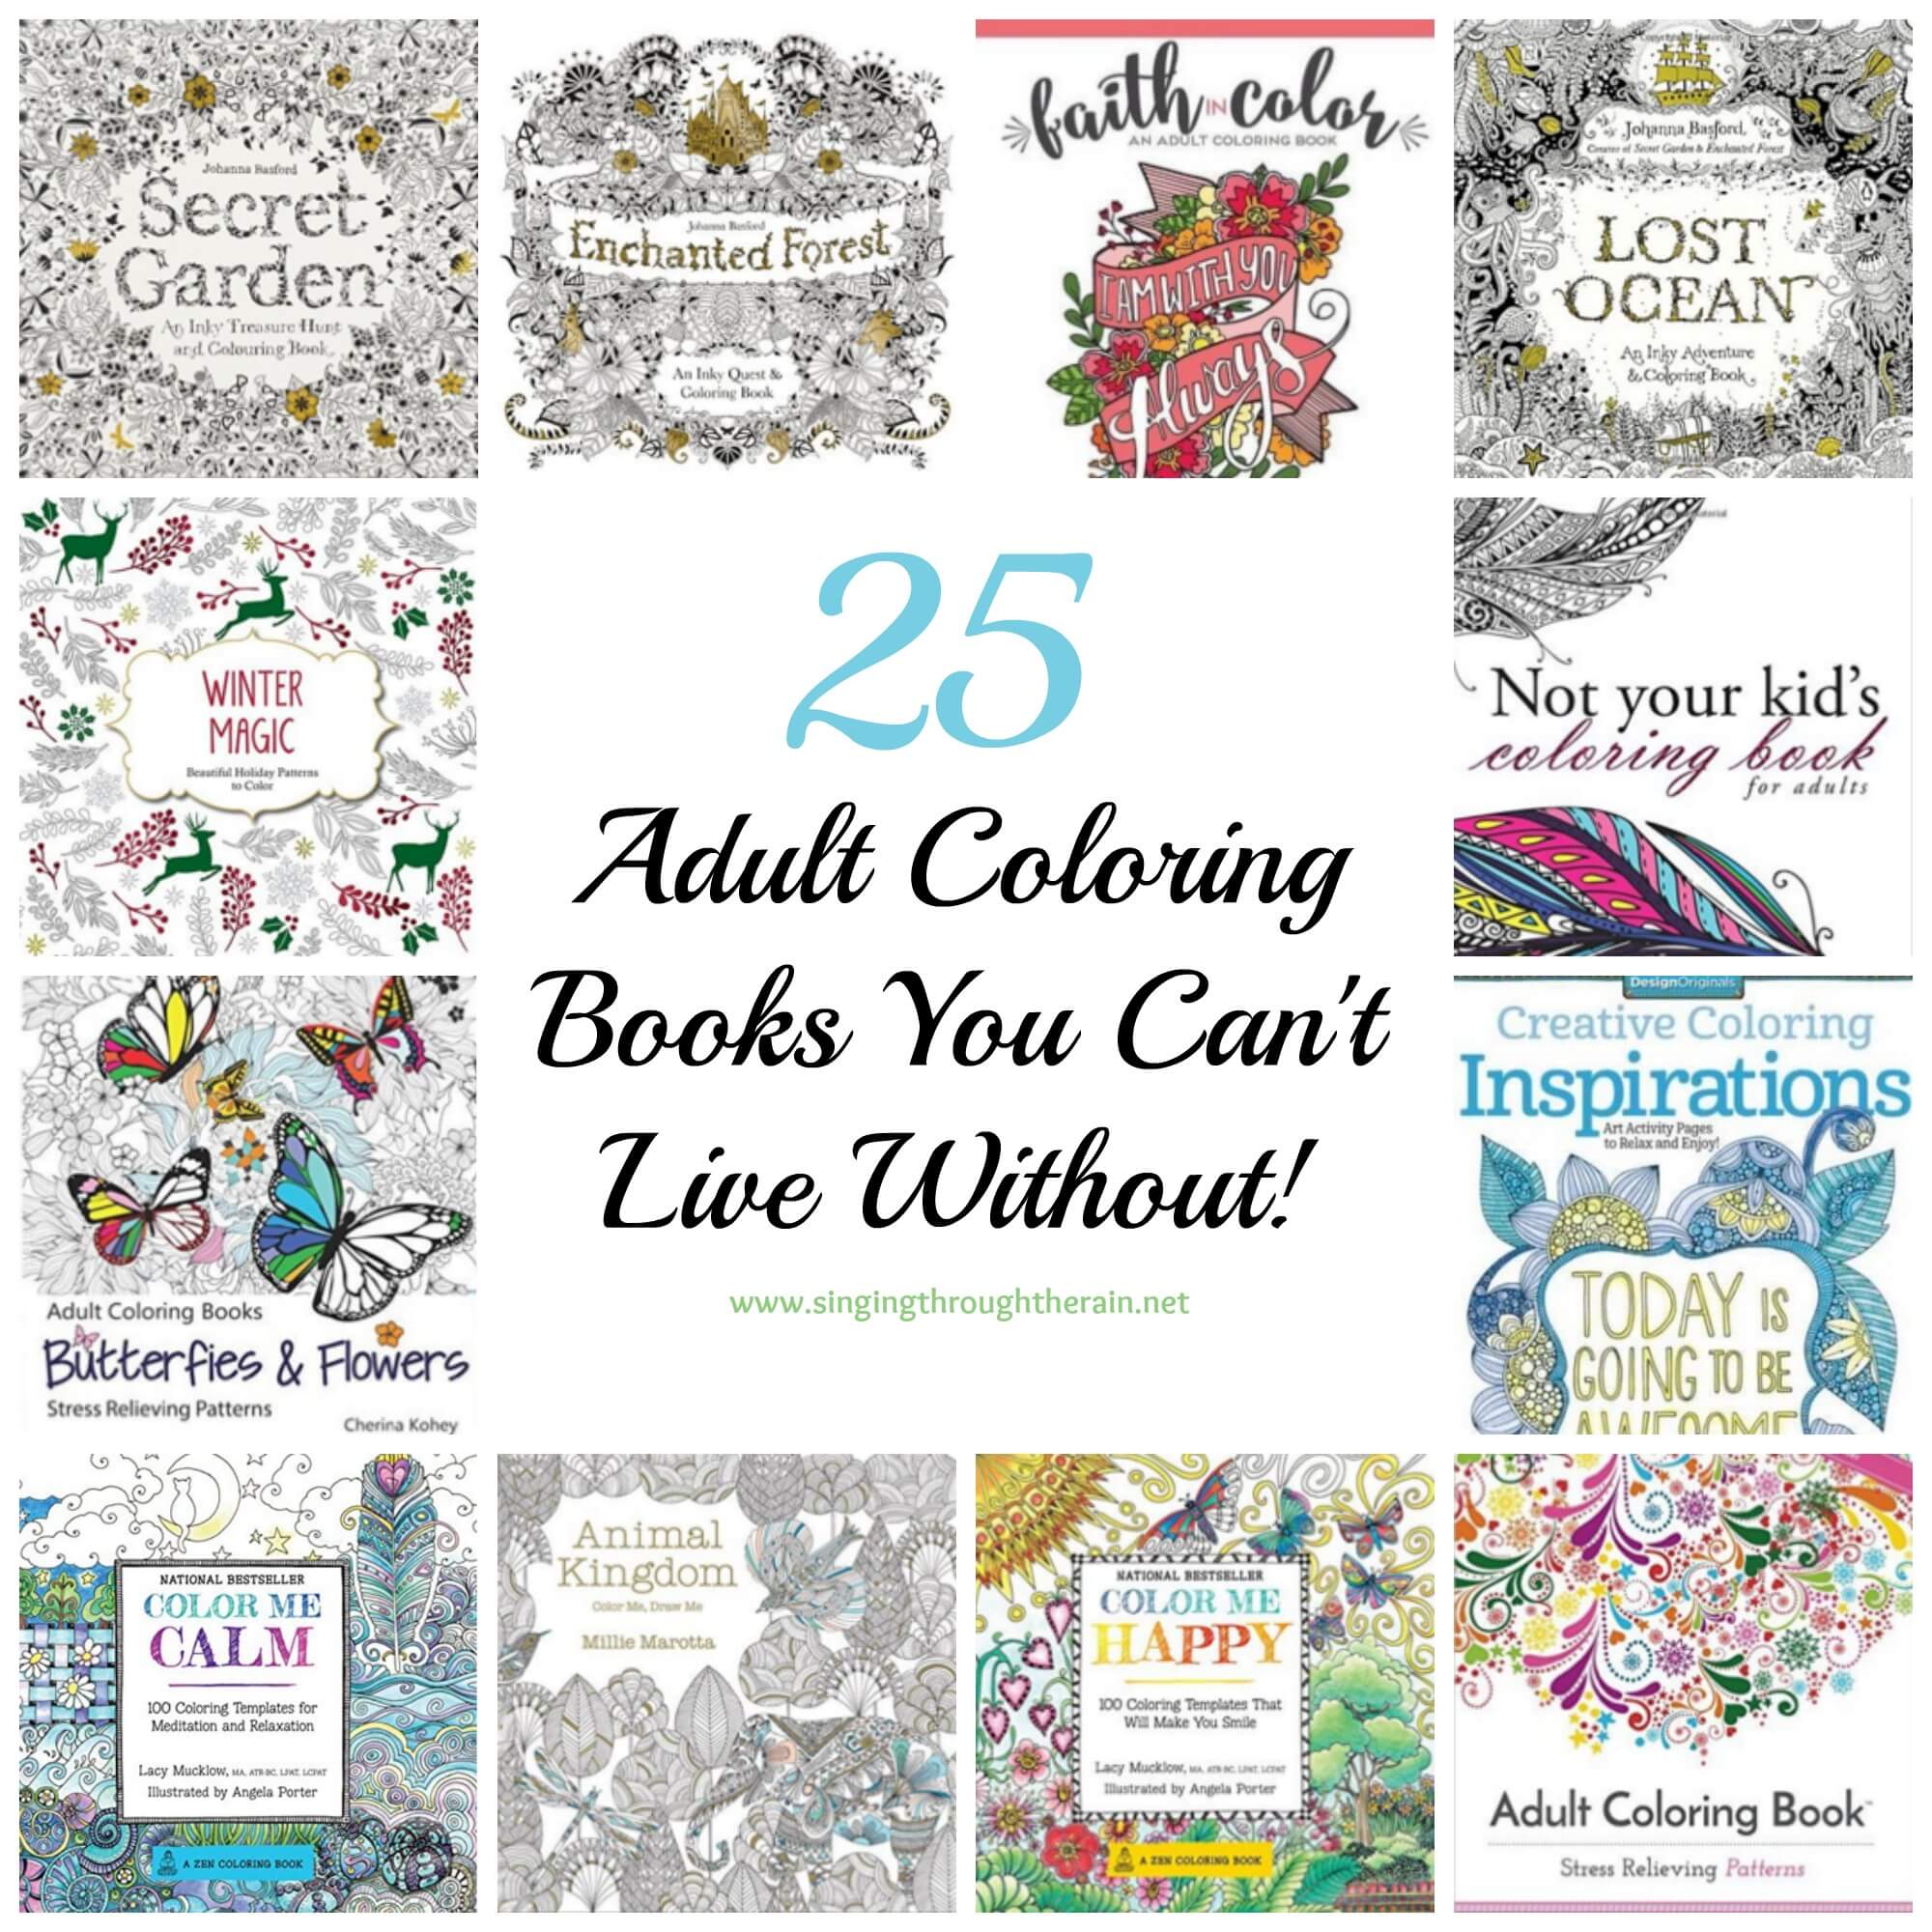 25 Adult Coloring Books You Can’t Live Without!